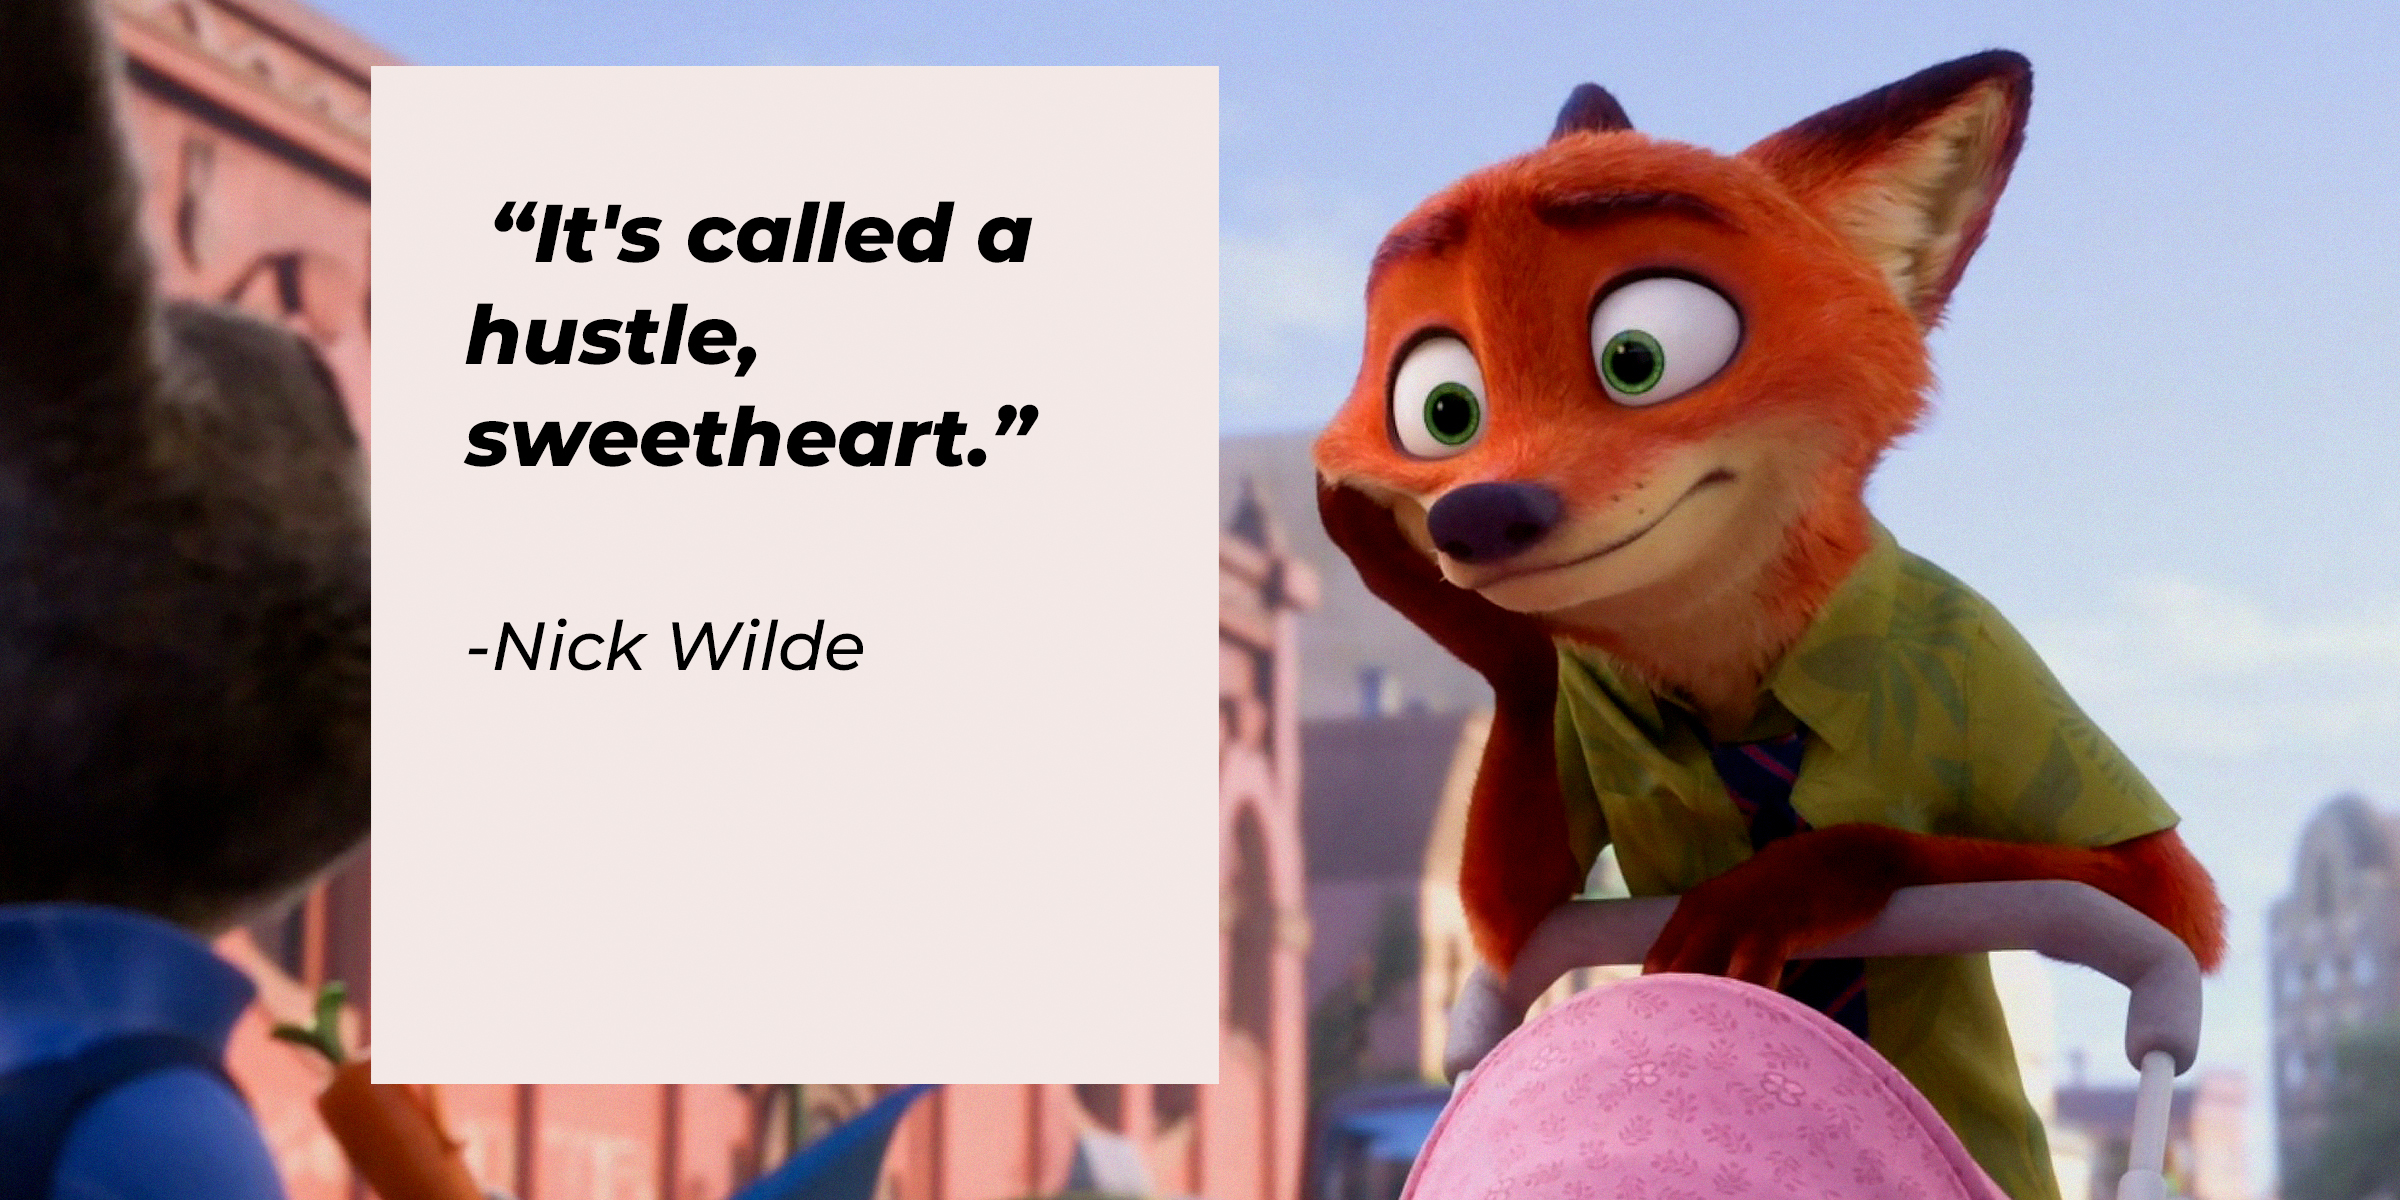 Nick Wilde, with his quote: "It's called a hustle, sweetheart." | Source: facebook.com/DisneyZootopia